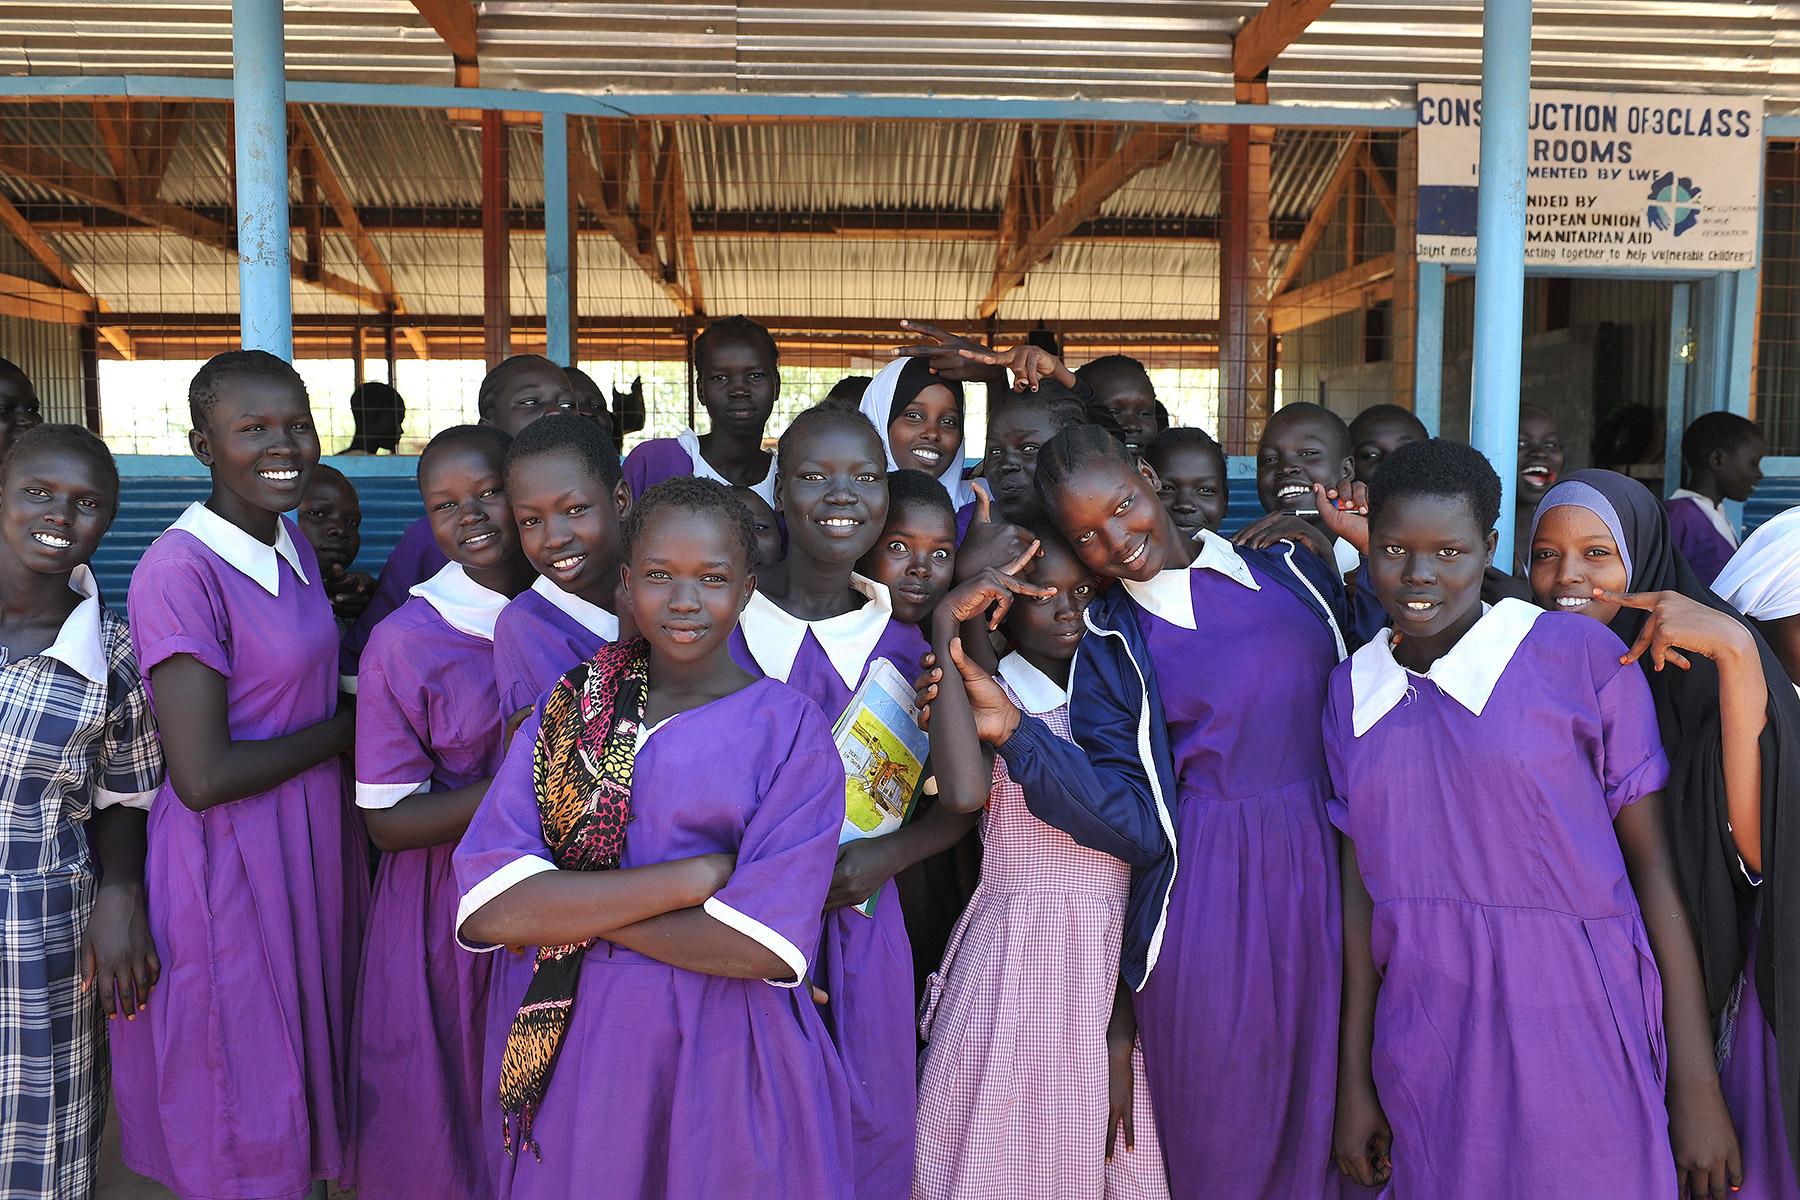 Girls in primary school in Kakuma refugee camp, Kenya. LWF is working to protect their right to education and a childhood without violence. Photo: LWF/ C. KÃ¤stner